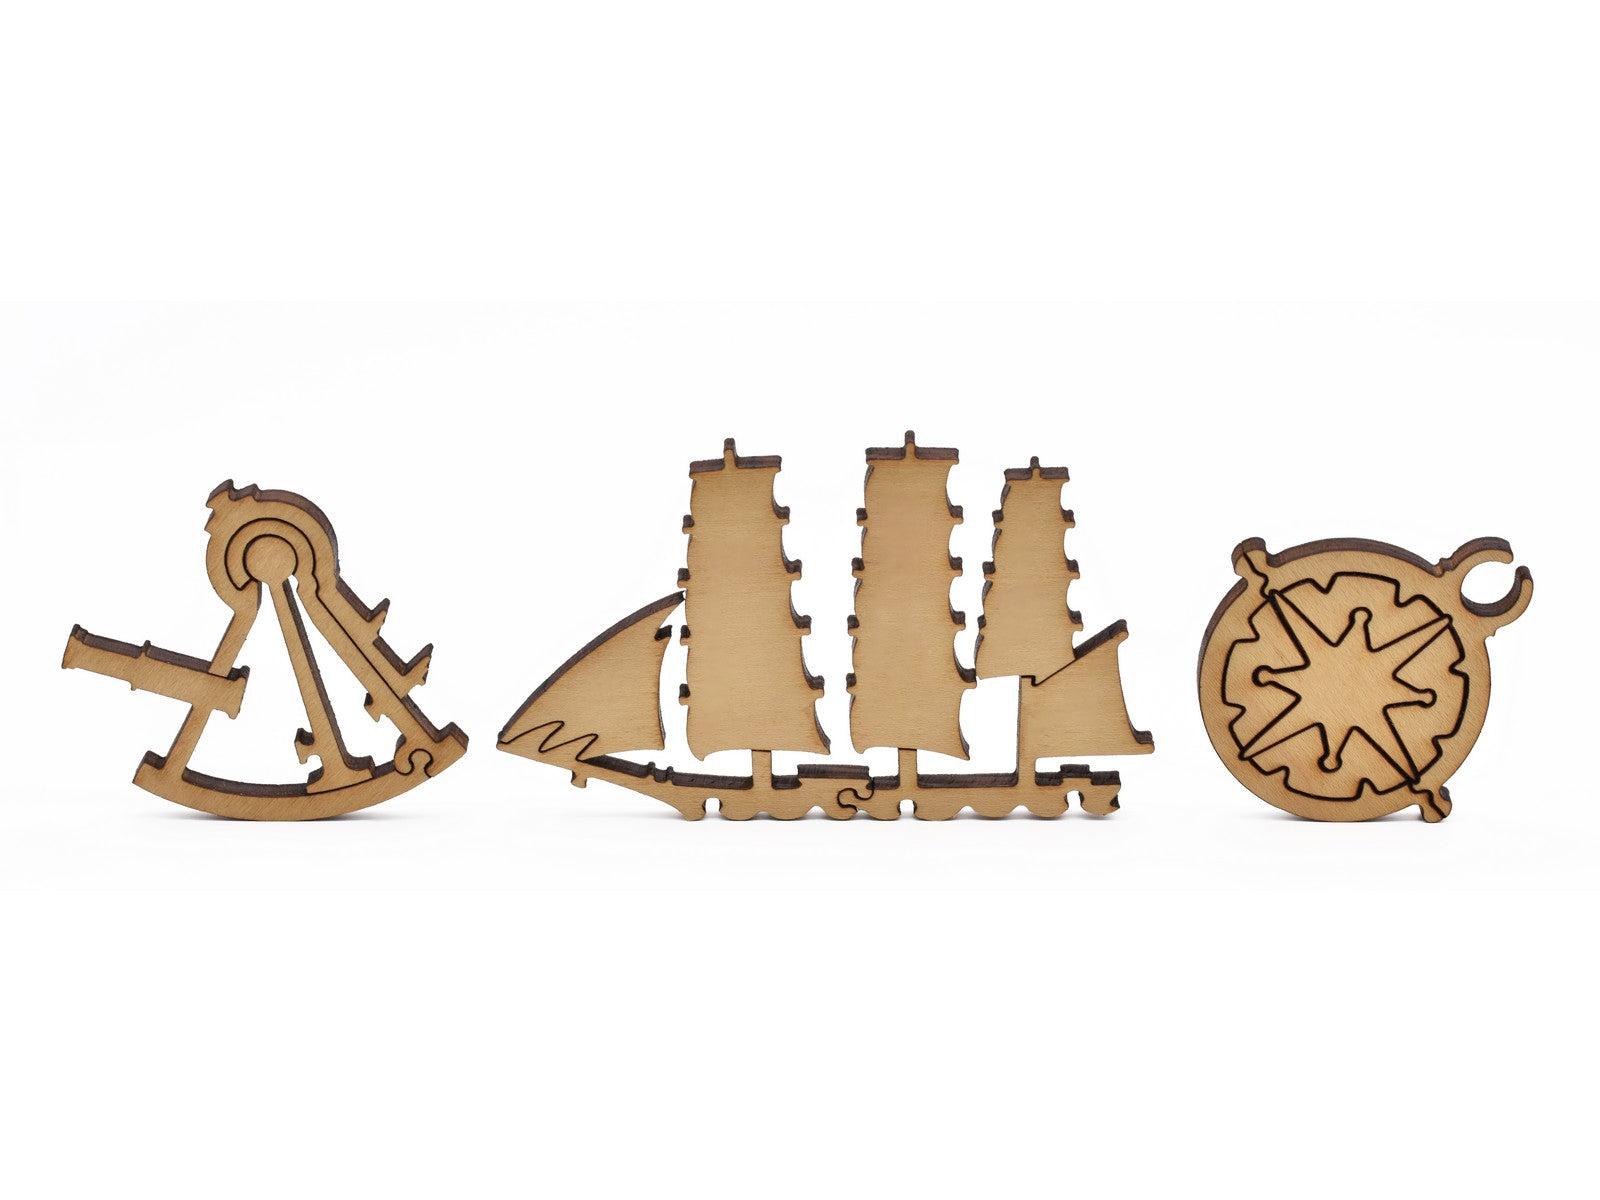 A closeup of pieces in the shape of a sextant, a ship, and a compass.